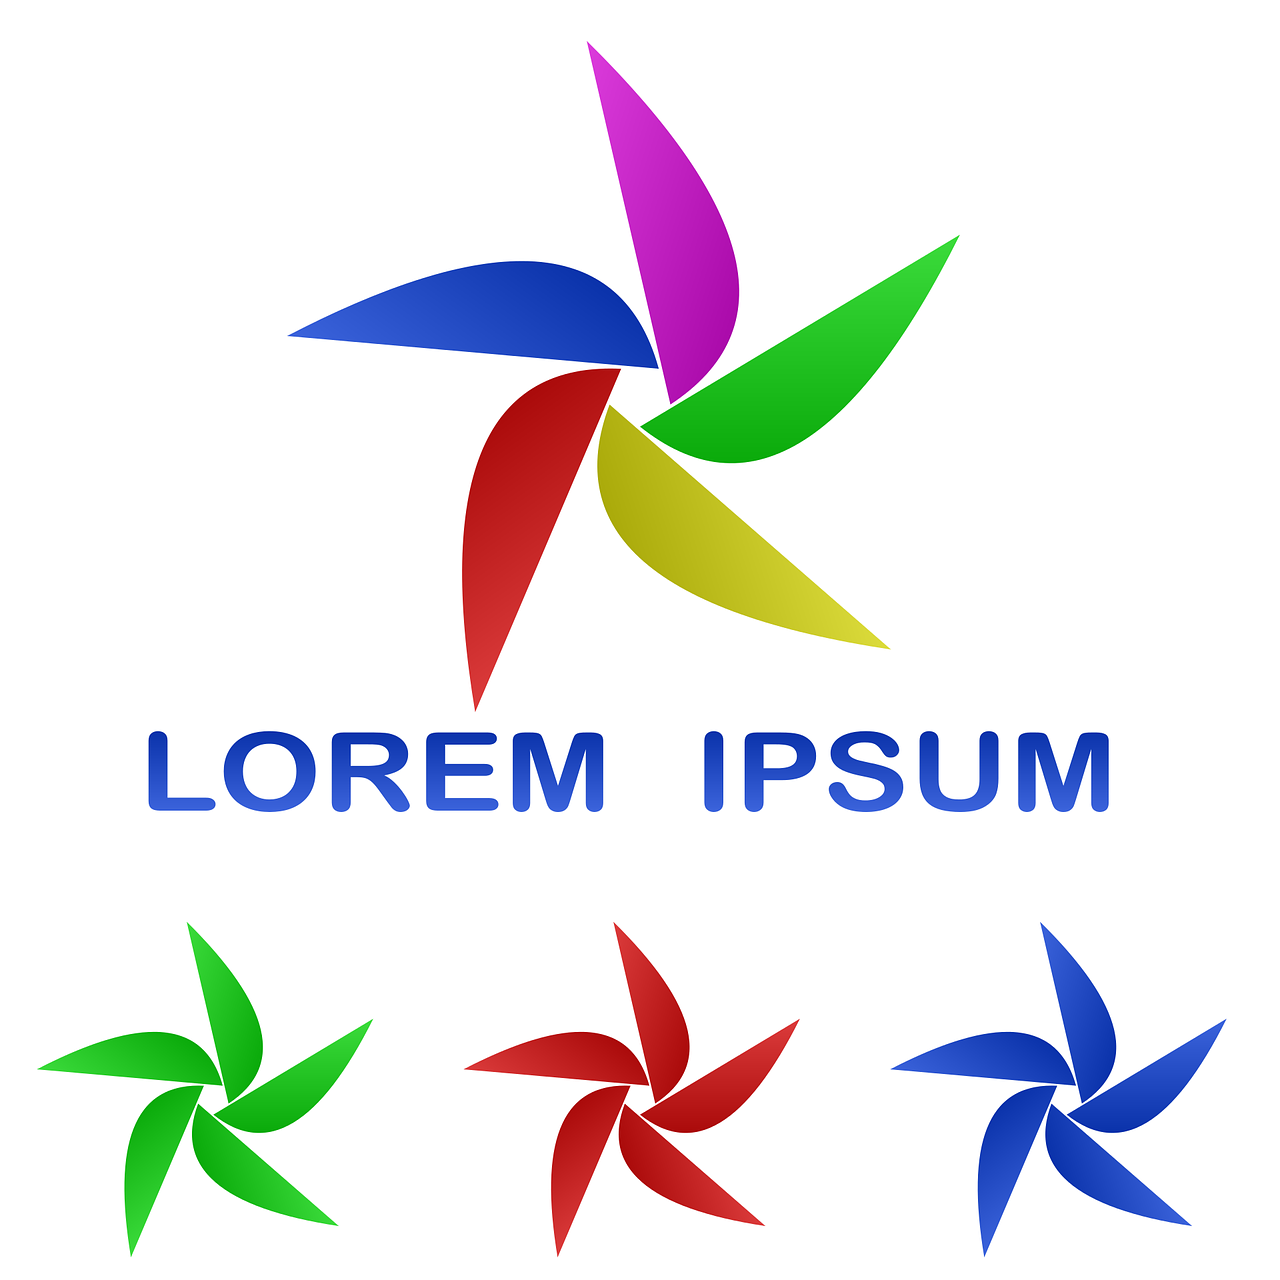 a set of four colorful pinwheels on a white background, by Leon Polk Smith, abstract illusionism, clematis theme logo, lorem ipsum dolor sit amet, 3 colours, simple and clean illustration